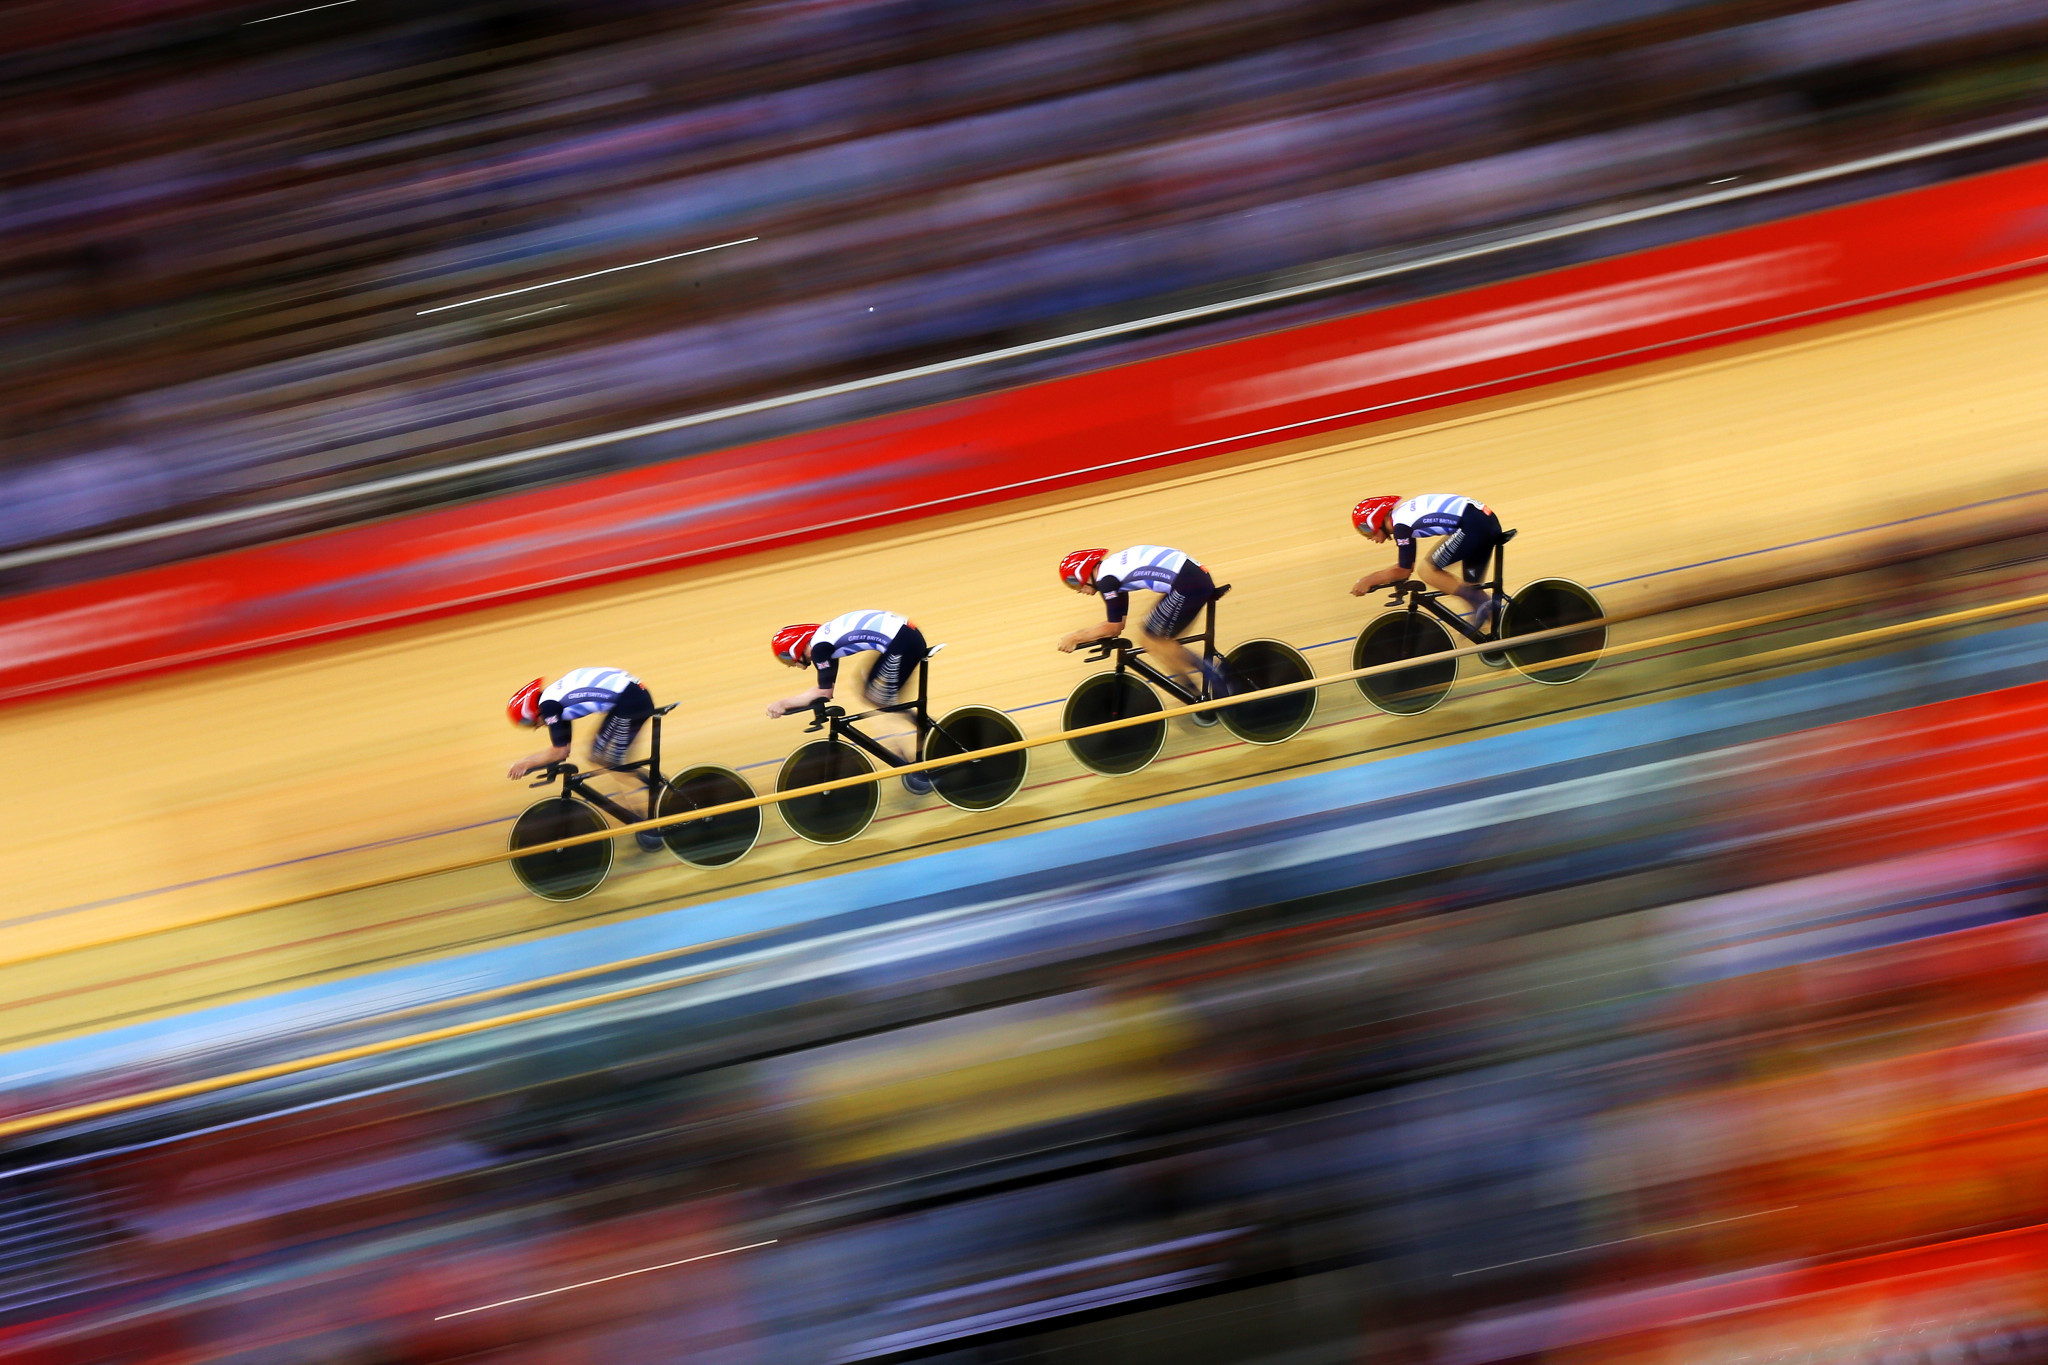 British Cycling, in particular its medical practices, is under increased scrutiny in the wake of the Richard Freeman scandal ©Getty Images